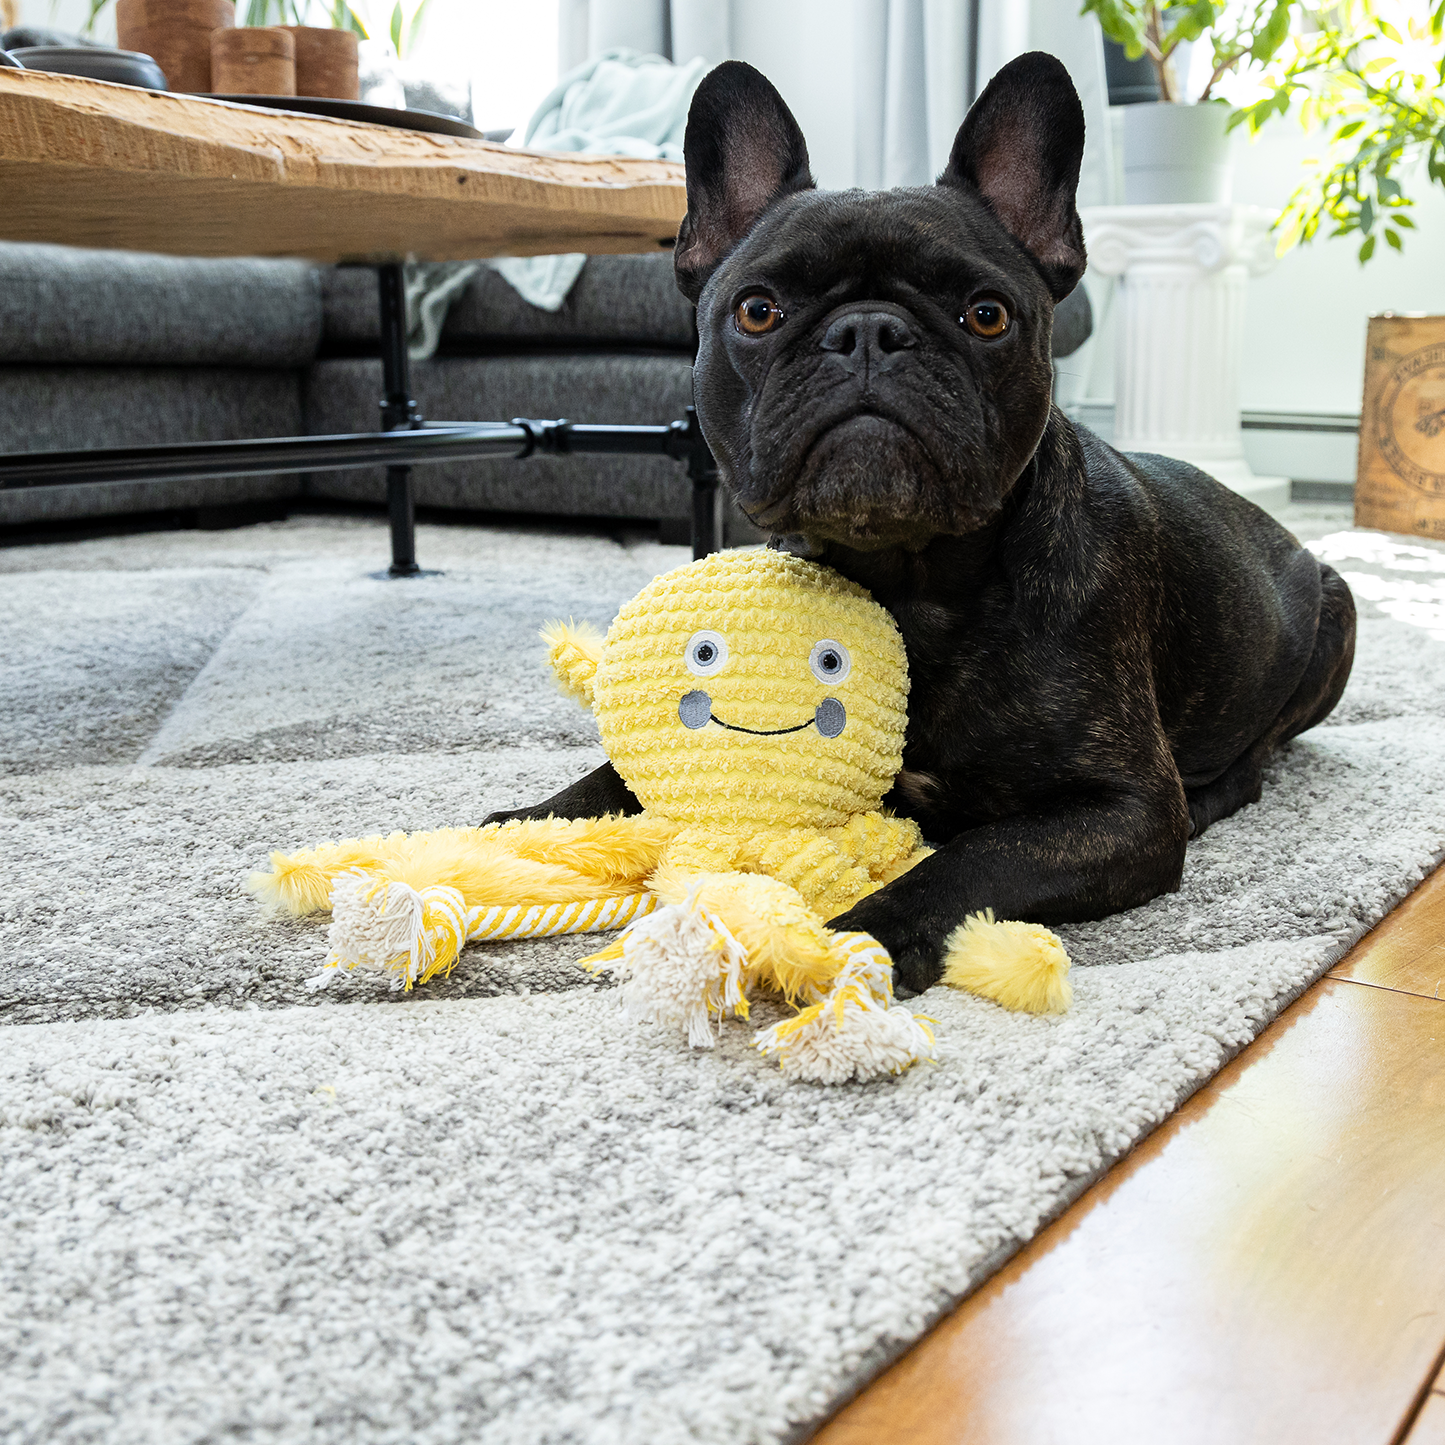 Plush toy for dog, octopus style